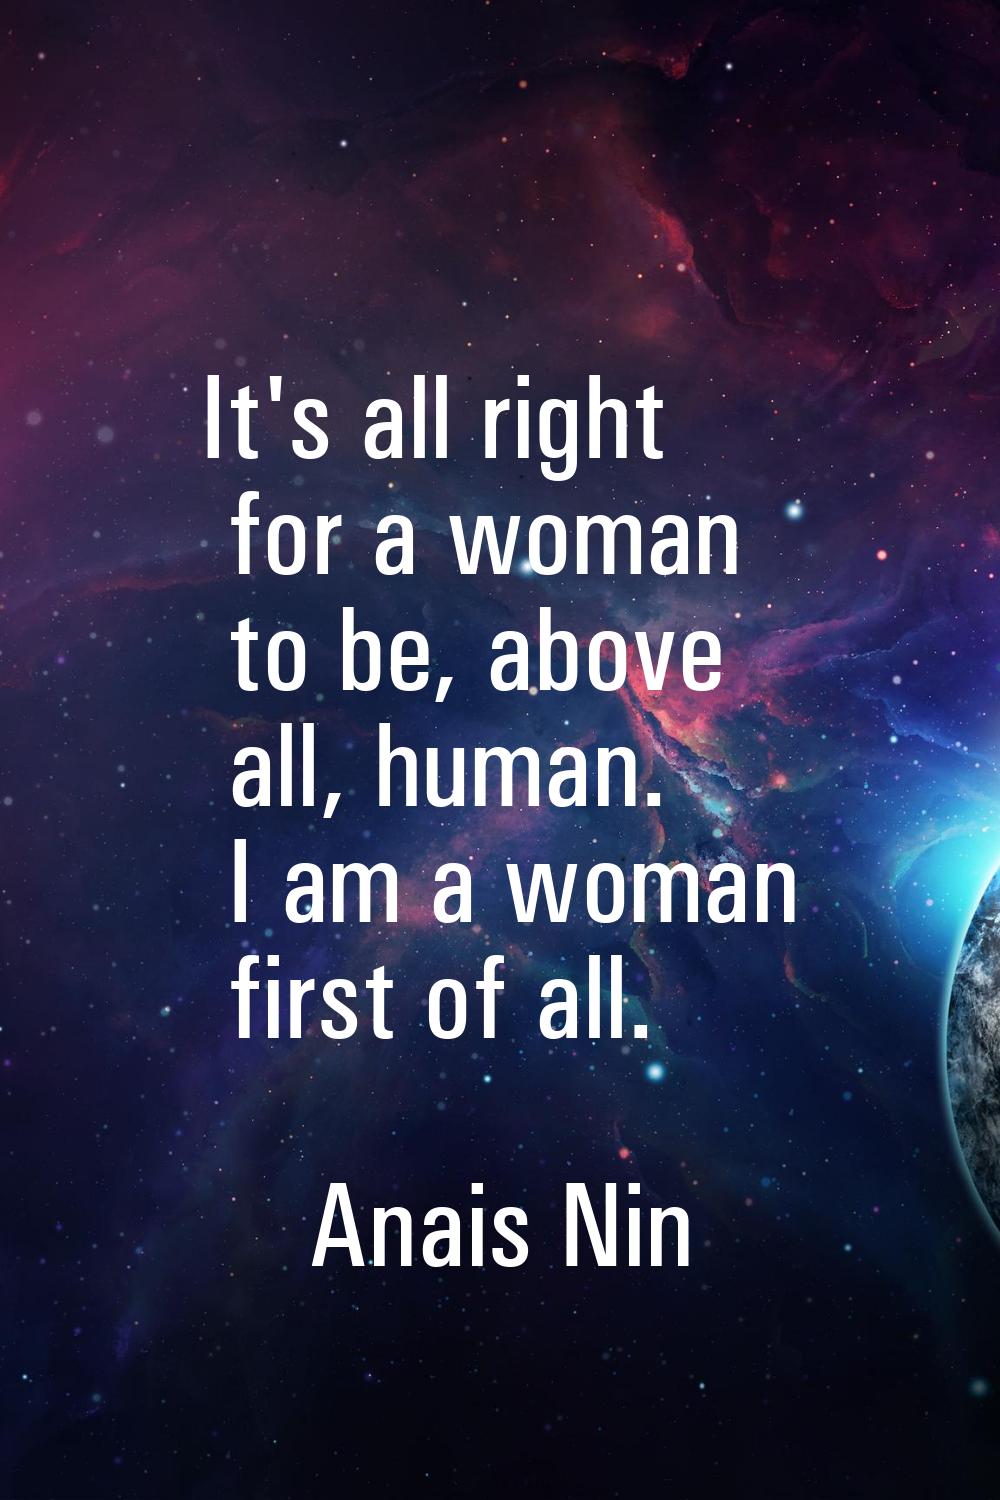 It's all right for a woman to be, above all, human. I am a woman first of all.